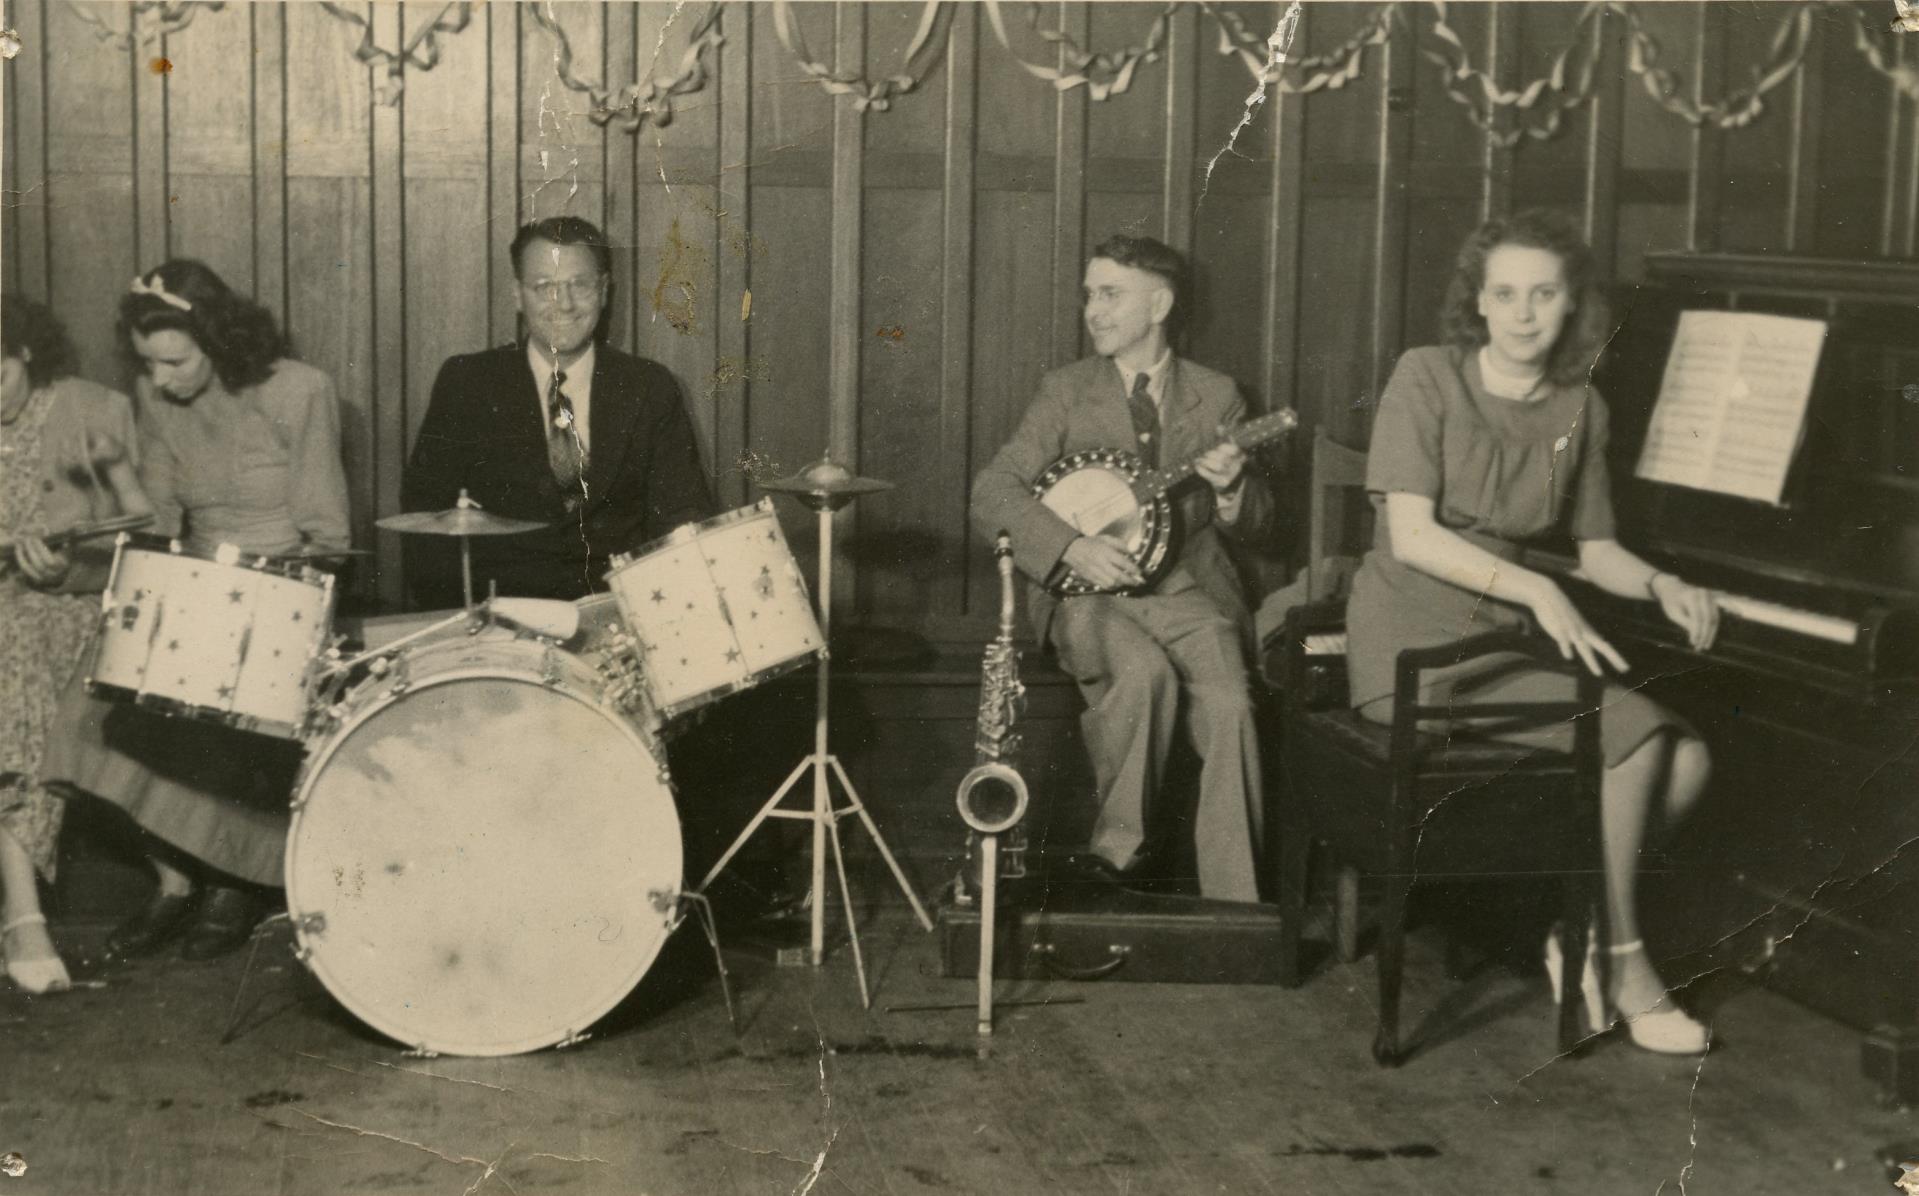 Beryl and her orchestra, Royal Park Bowling Club, 1948